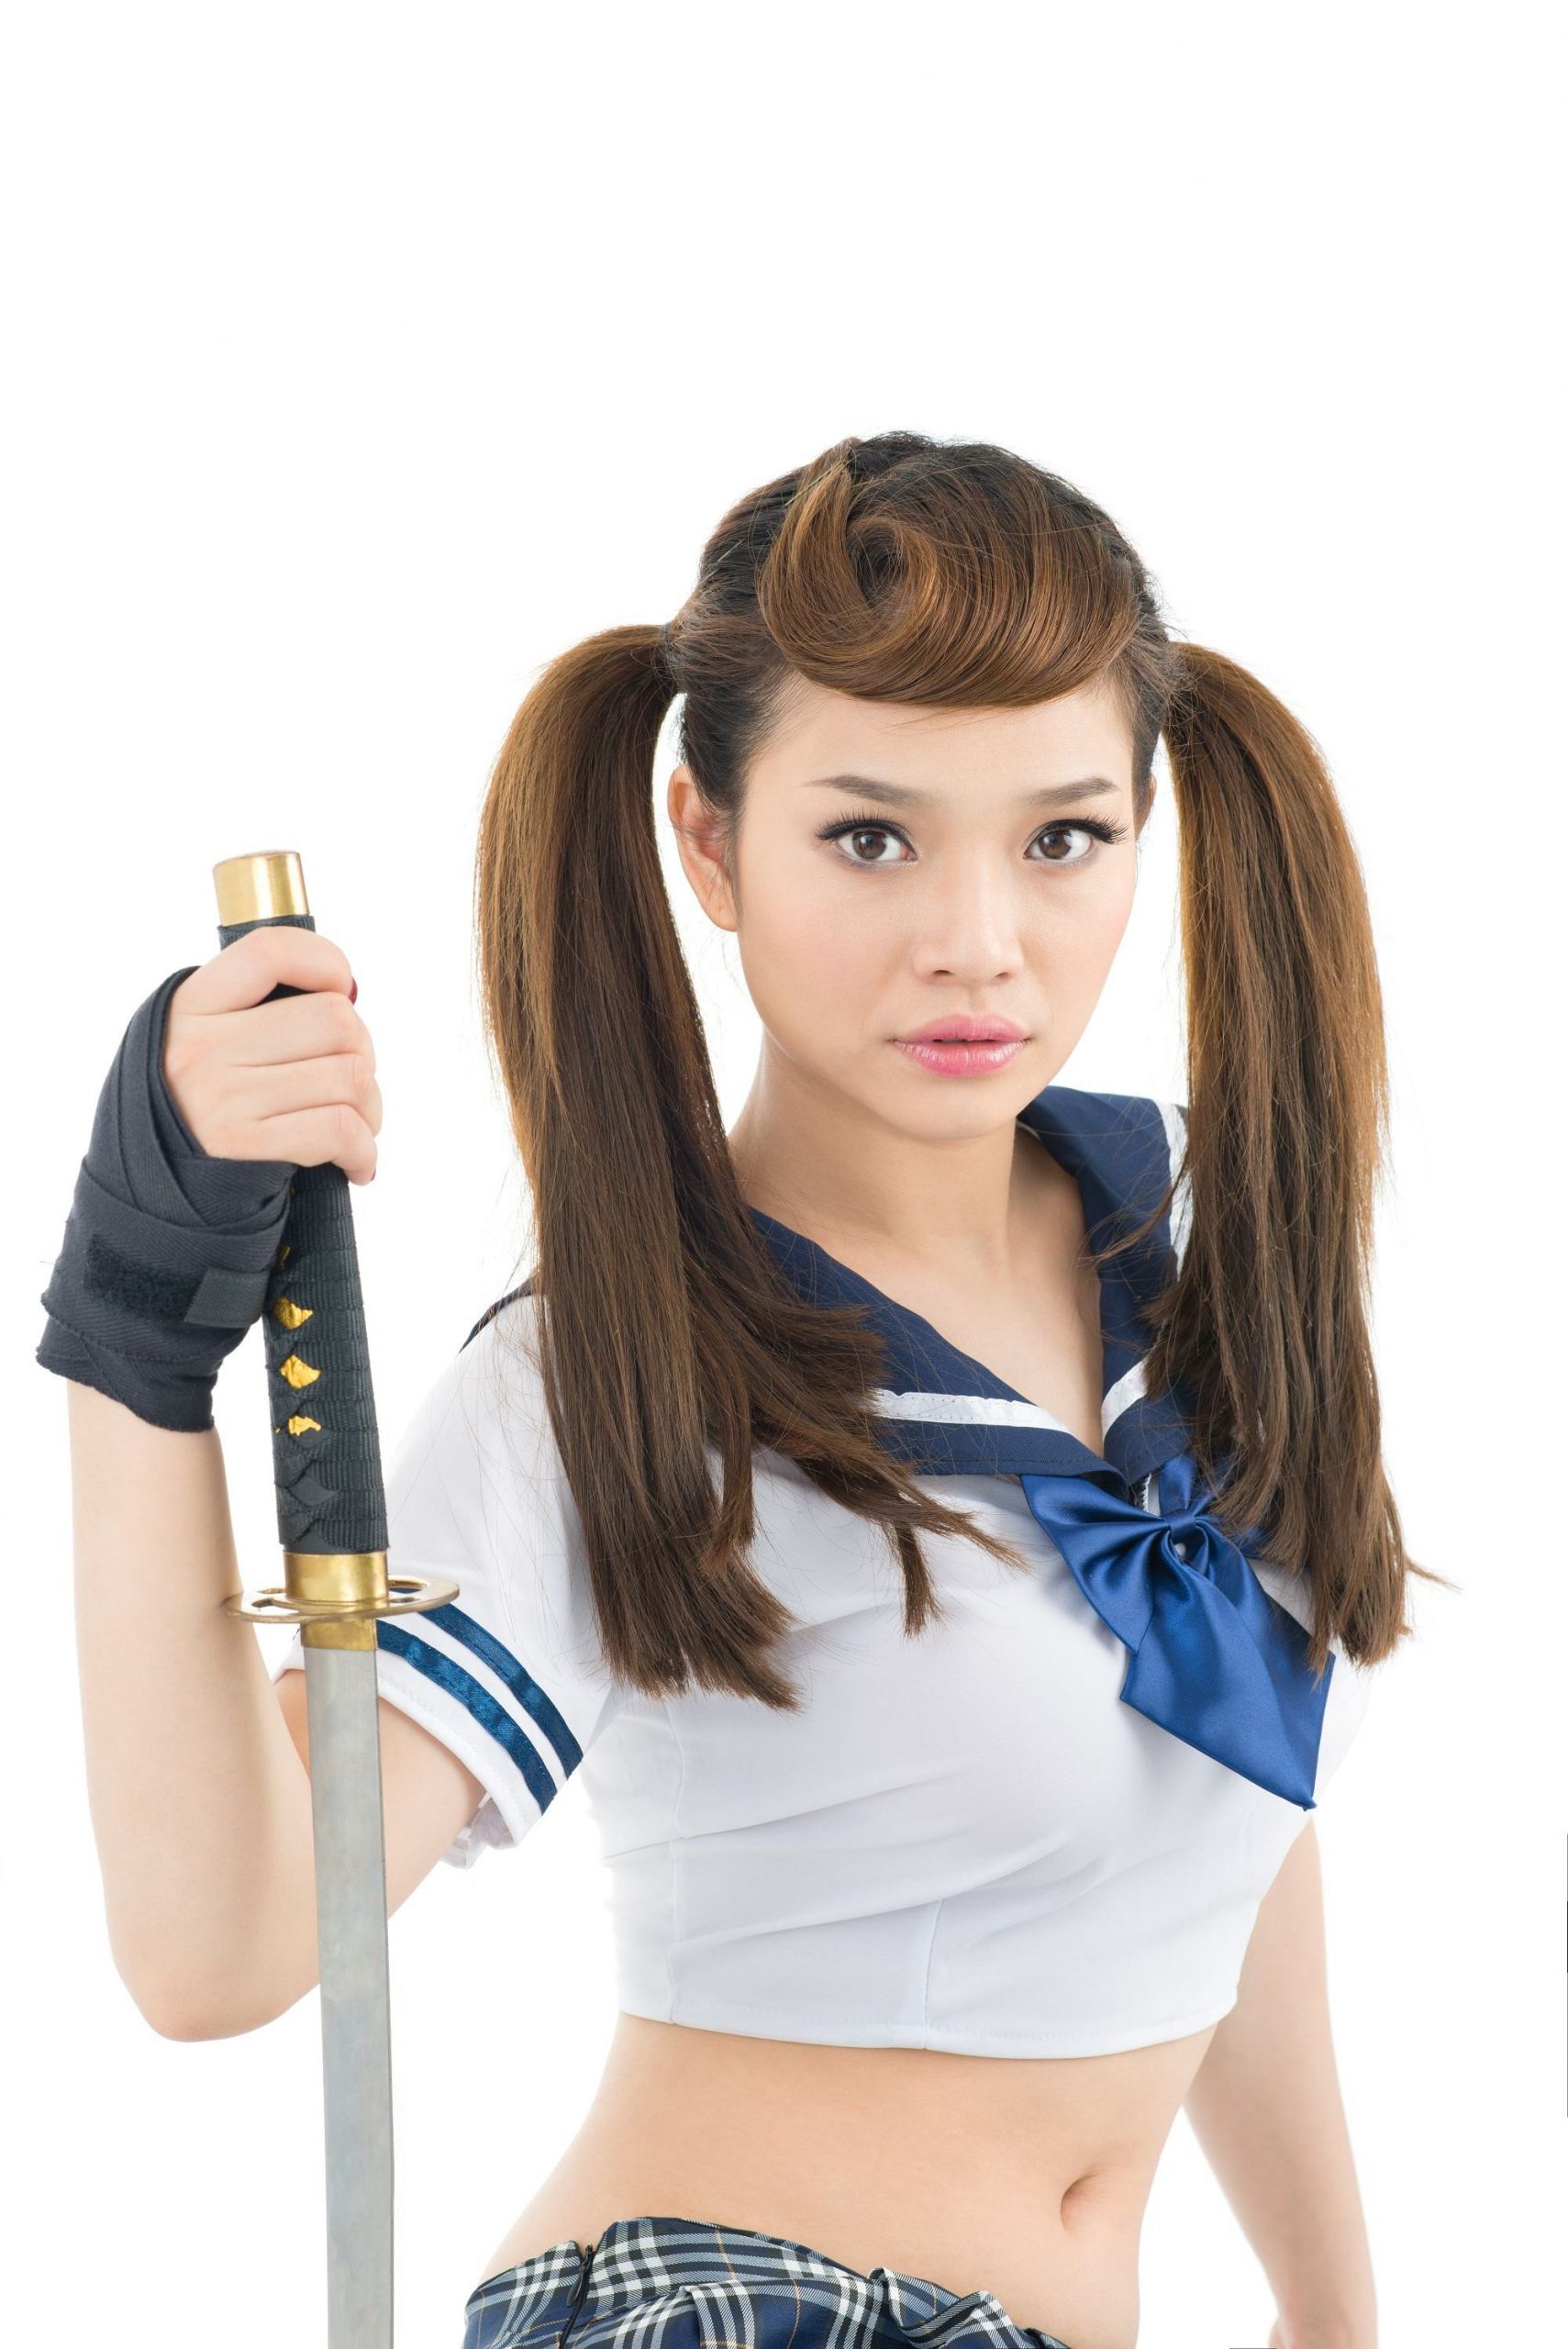 Anime Pigtail Hairstyles
 8 Anime Hairstyles For Pinays This Halloween